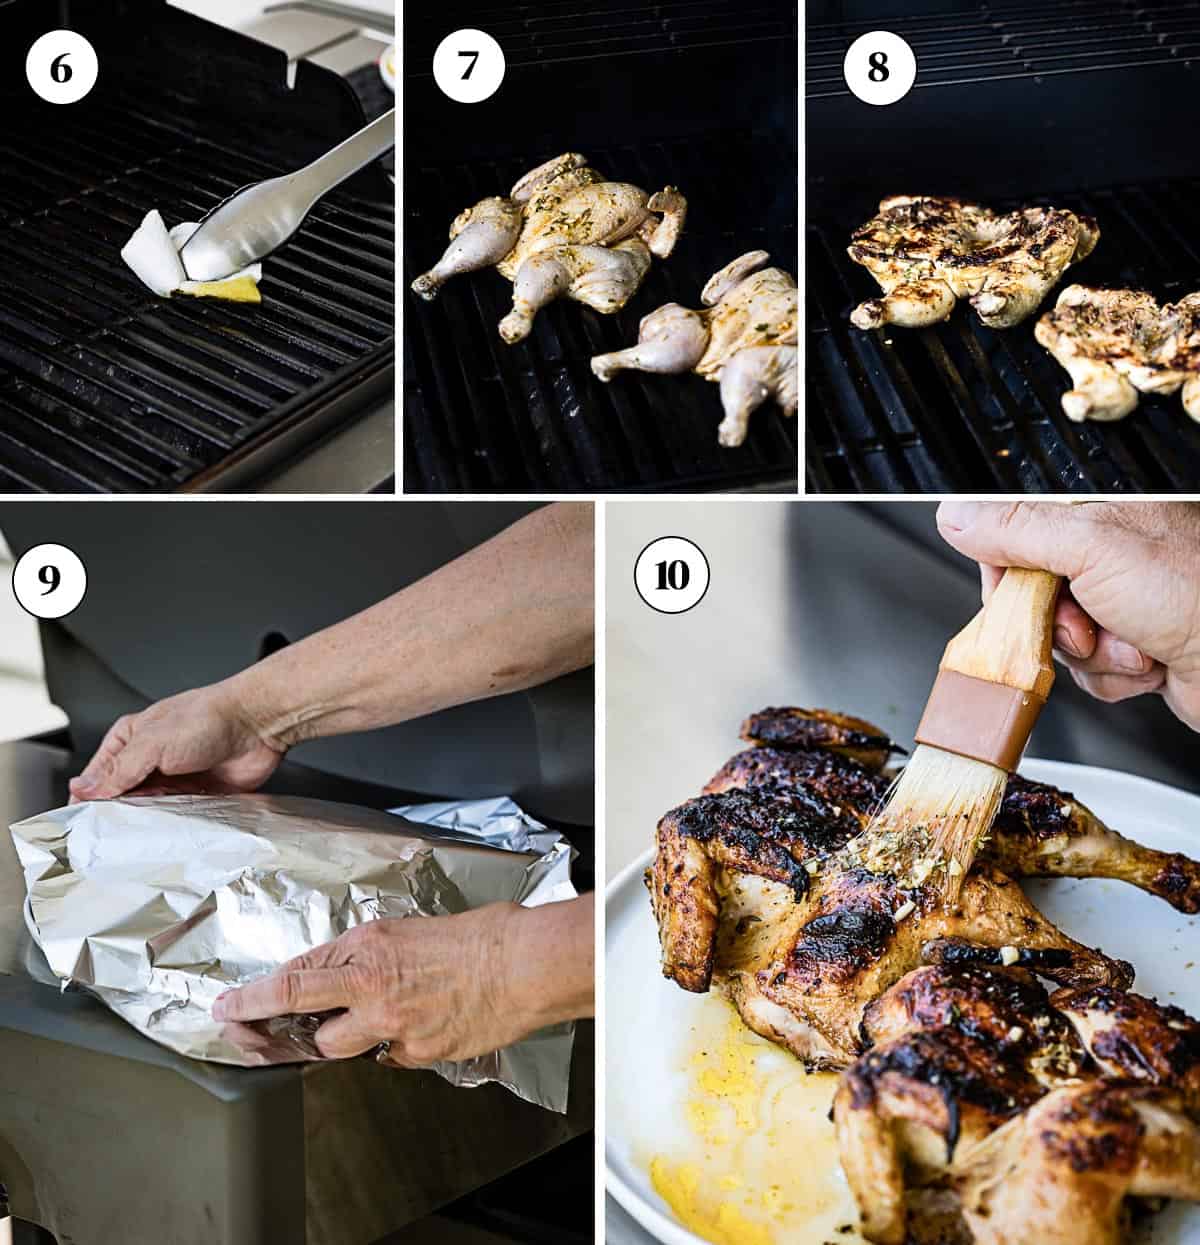 Person showing how to cook Cornish hens on a grill in a collage of images.